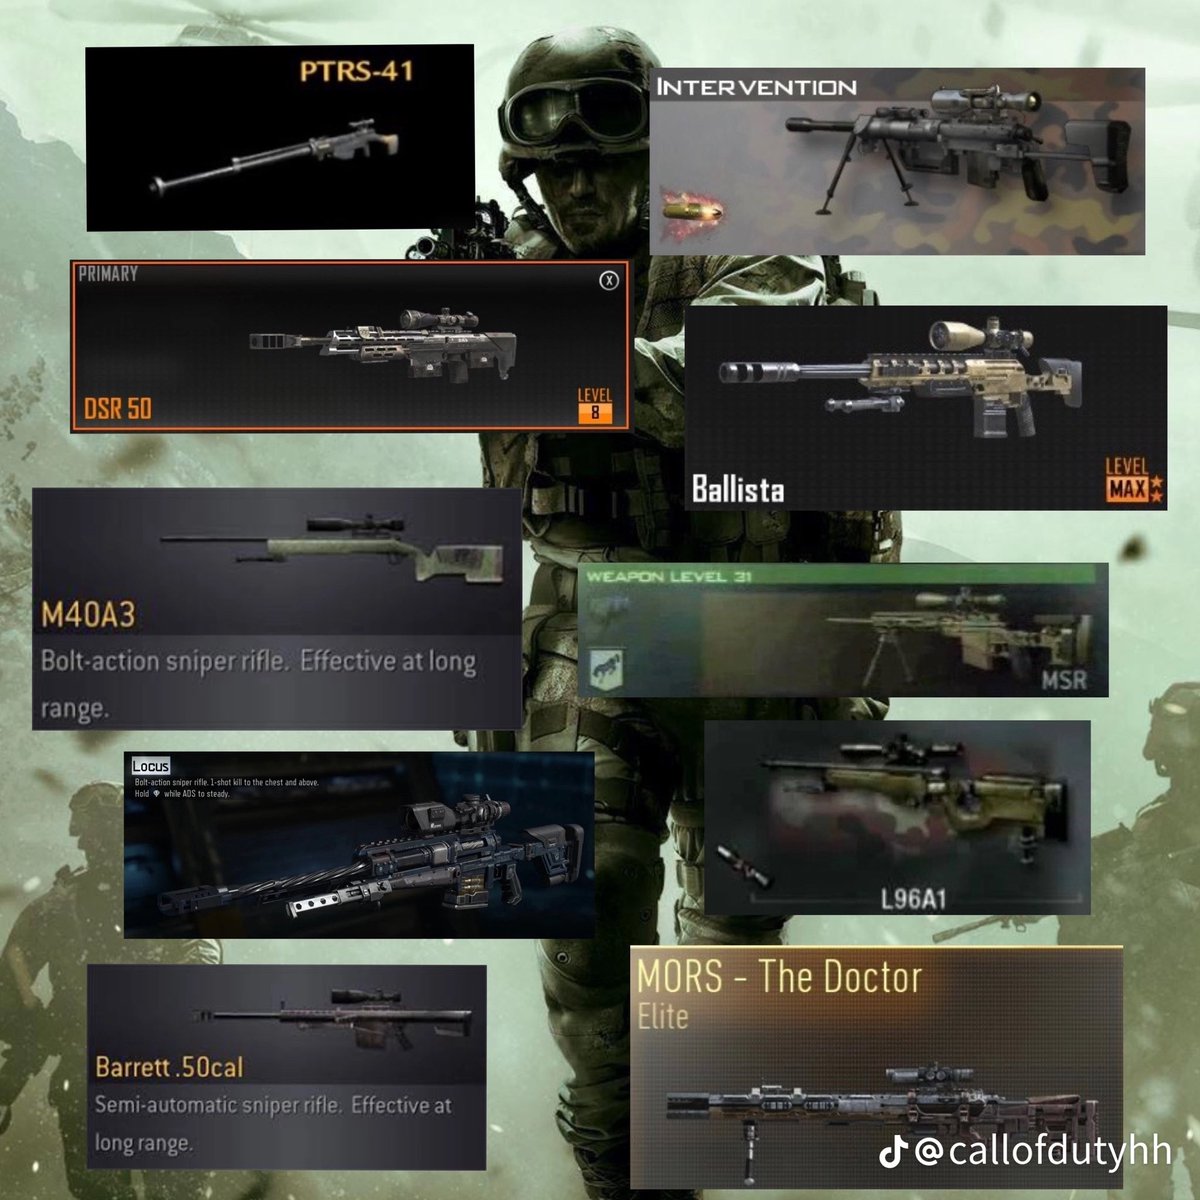 What’s the best sniper of all time?